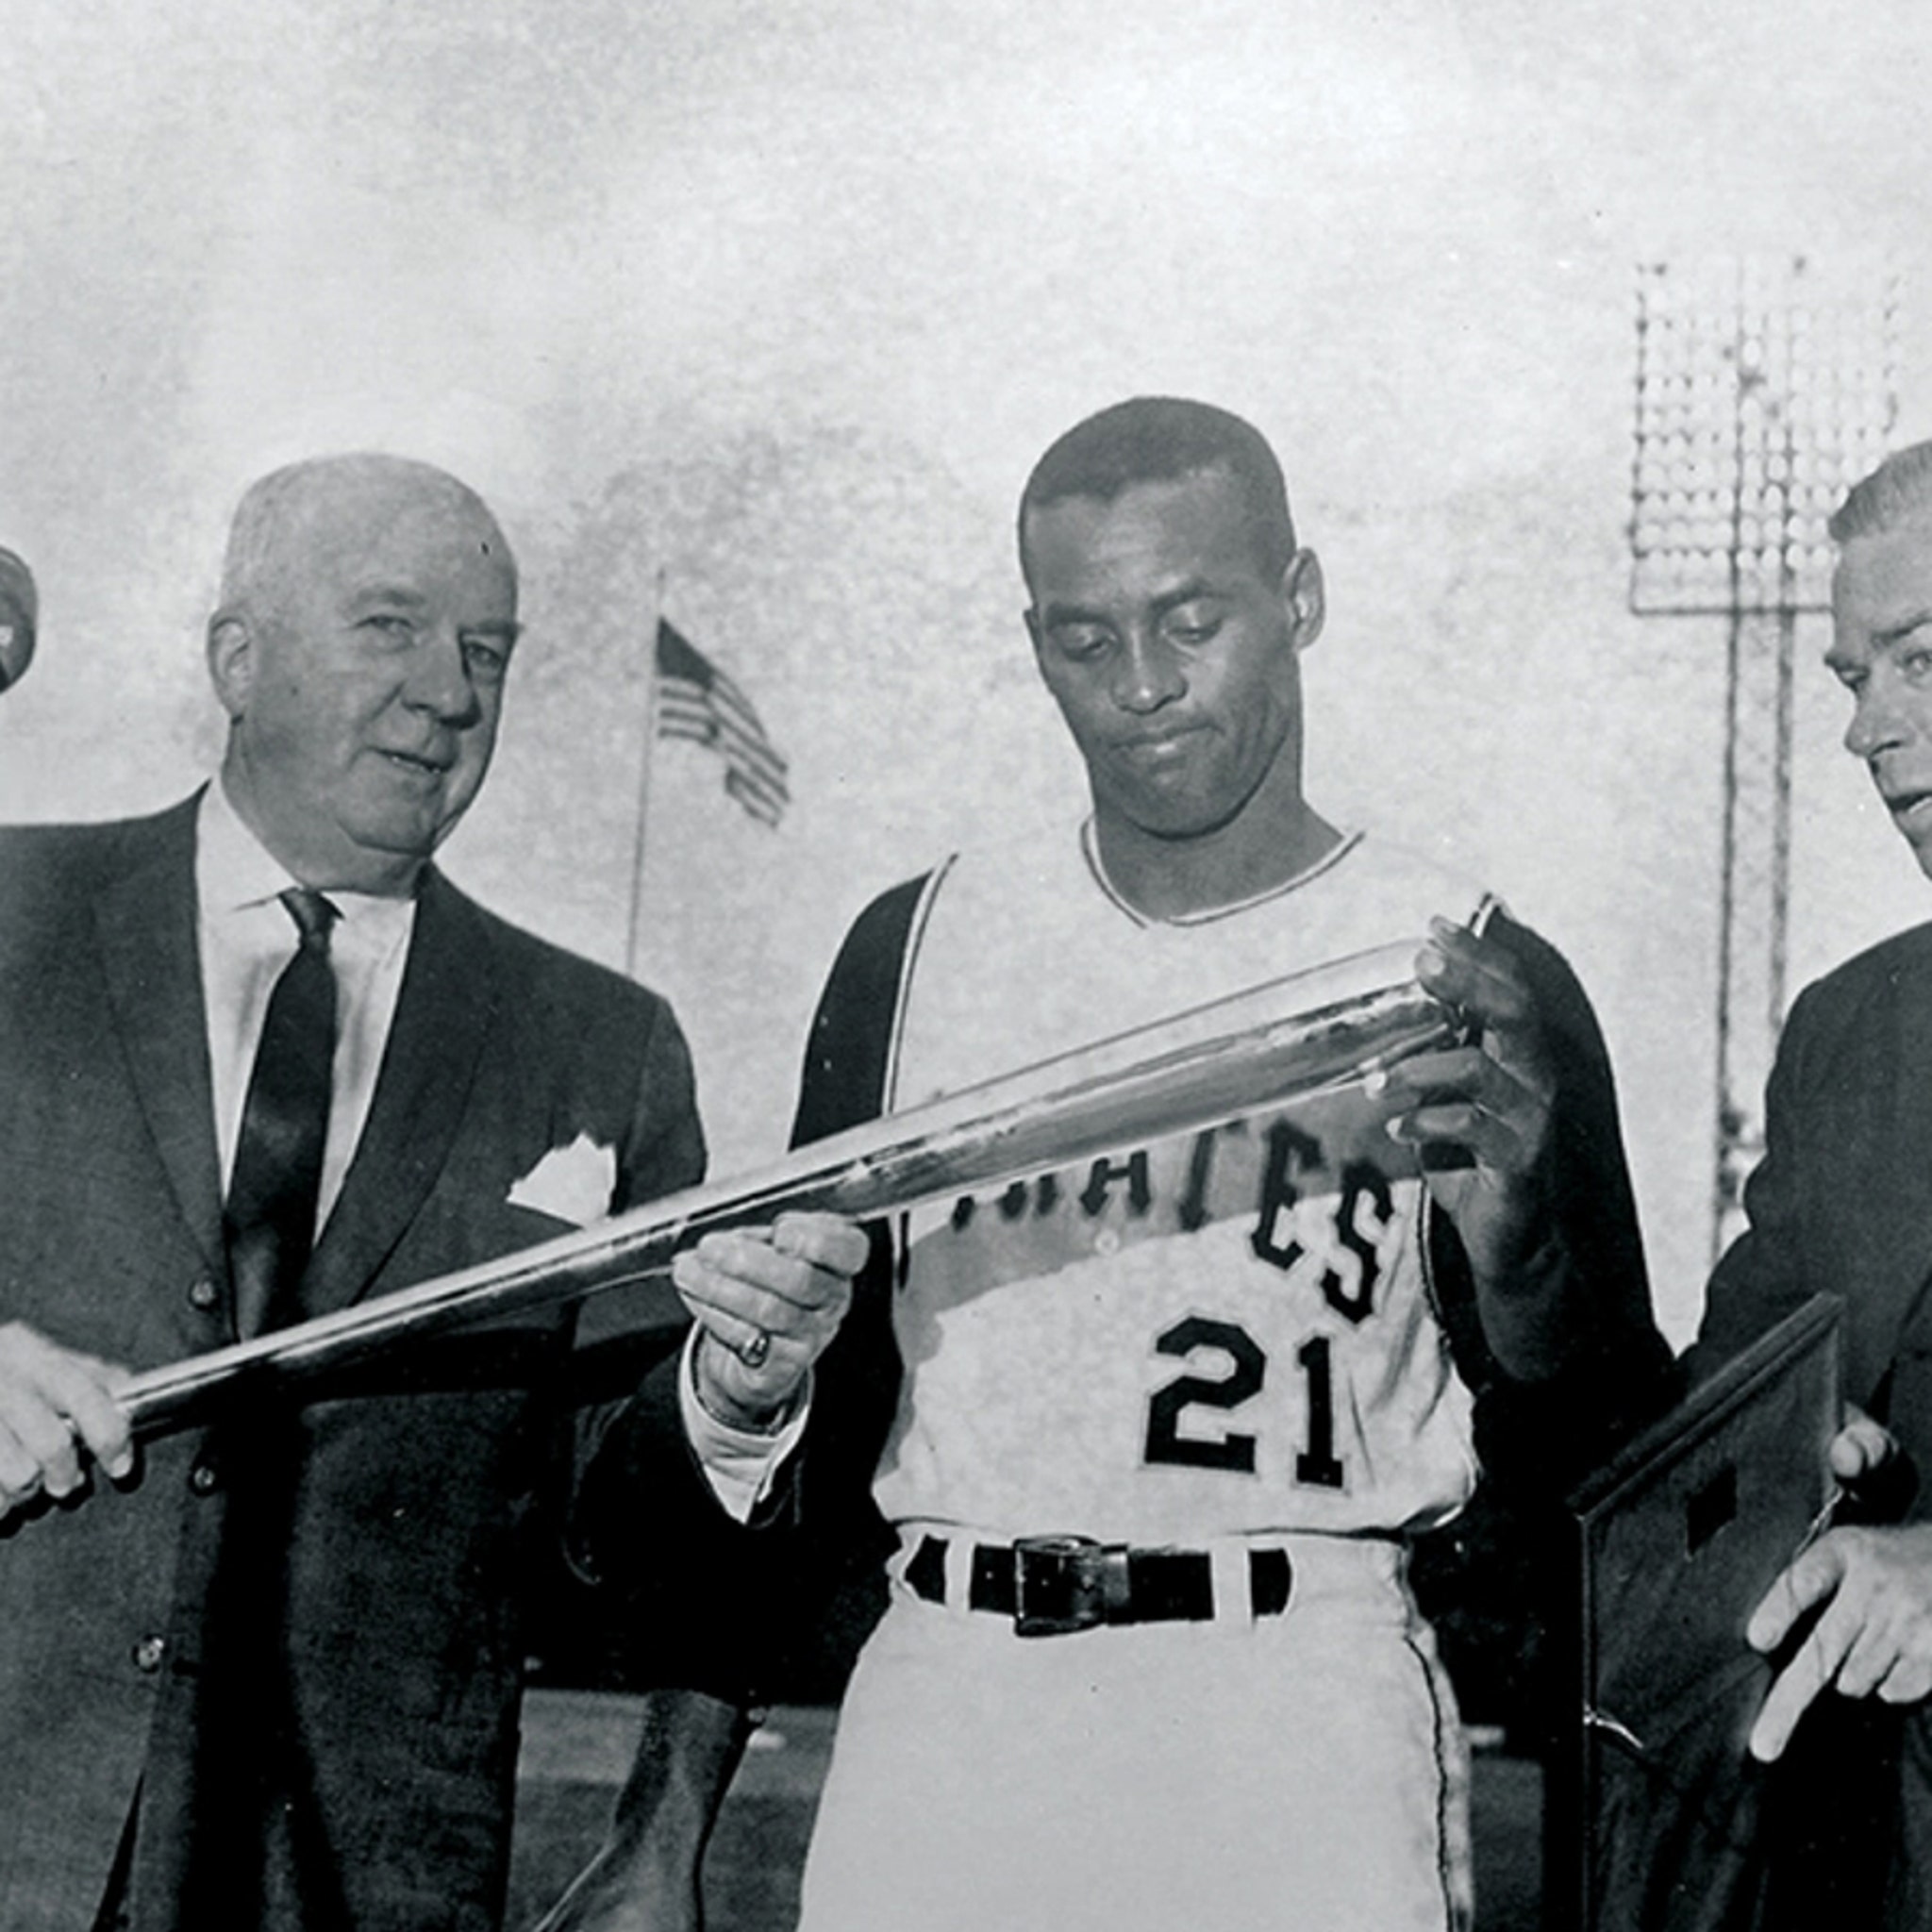 Roberto Clemente's Silver Bat Award From 1964 Up For Auction